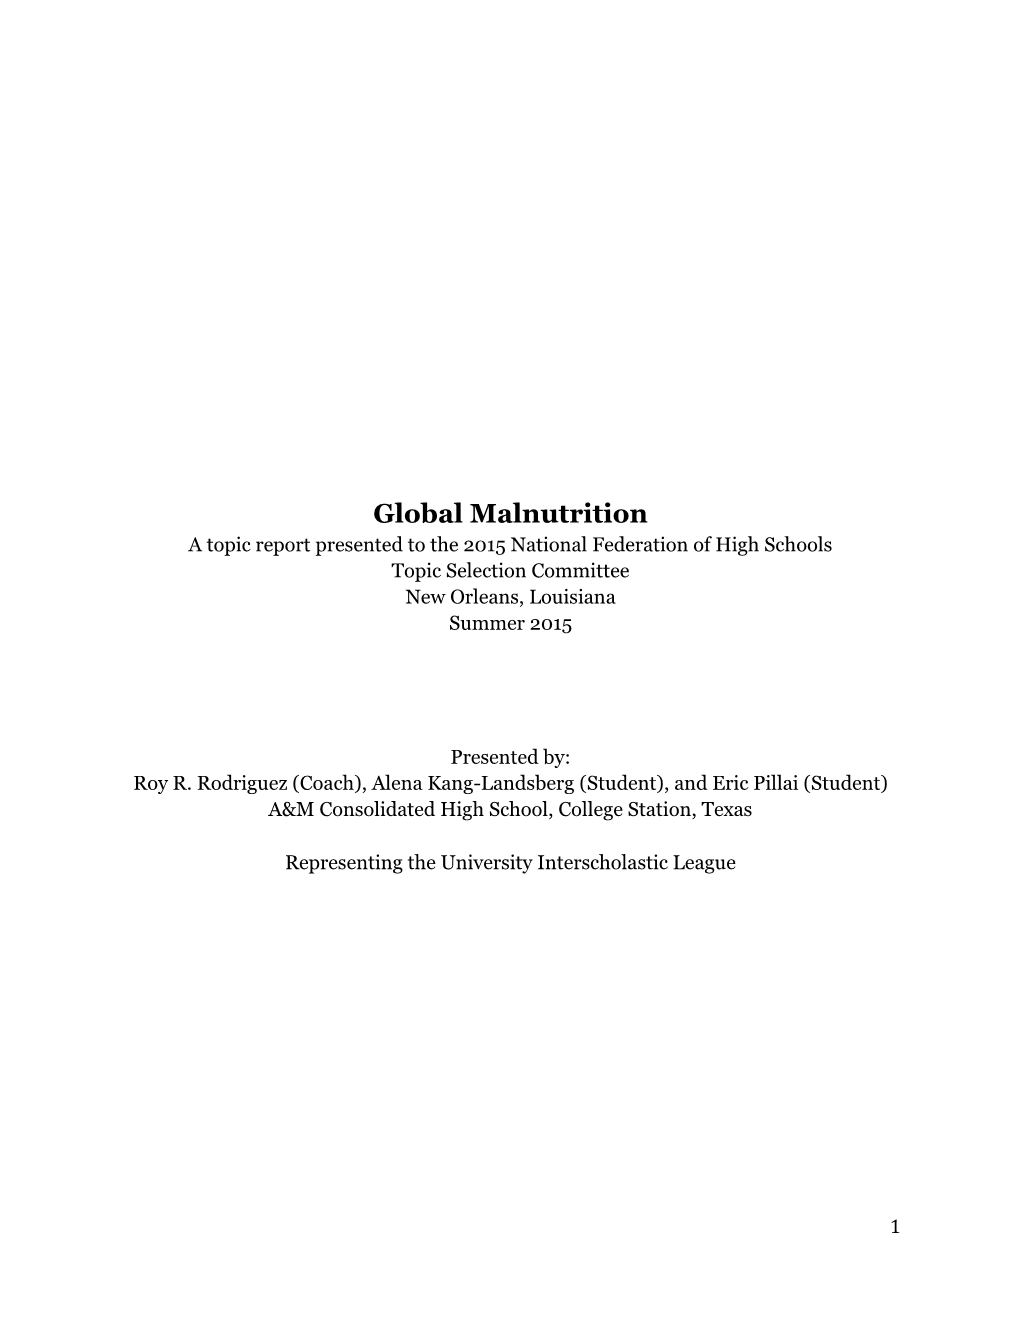 Global Malnutrition a Topic Report Presented to the 2015 National Federation of High Schools Topic Selection Committee New Orleans, Louisiana Summer 2015